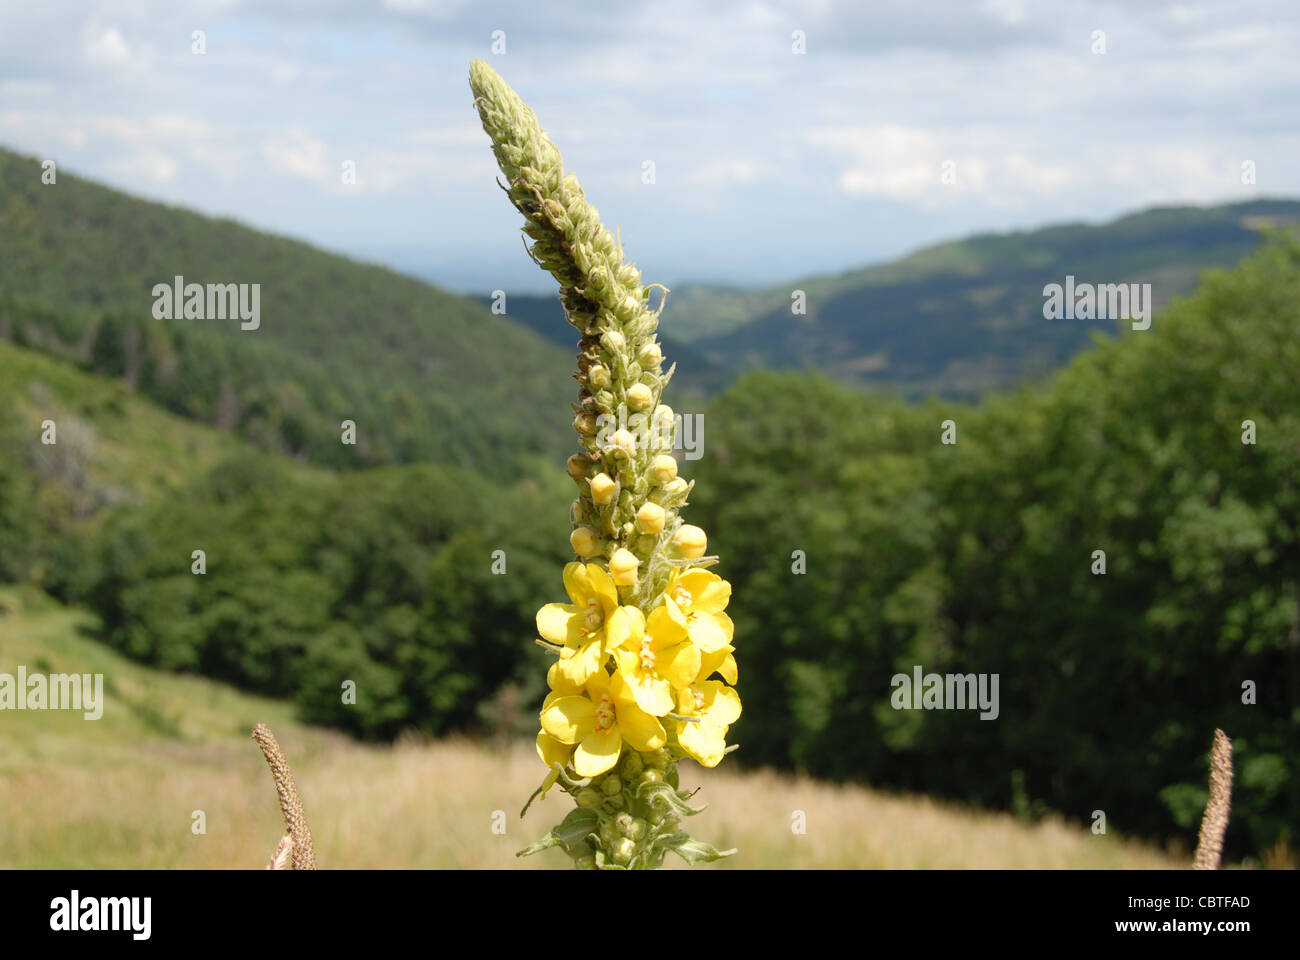 Common mullen or mullein flowering on a meadow in the Ardeche mountains in the Parc naturel regional des monts d'Ardeche Stock Photo